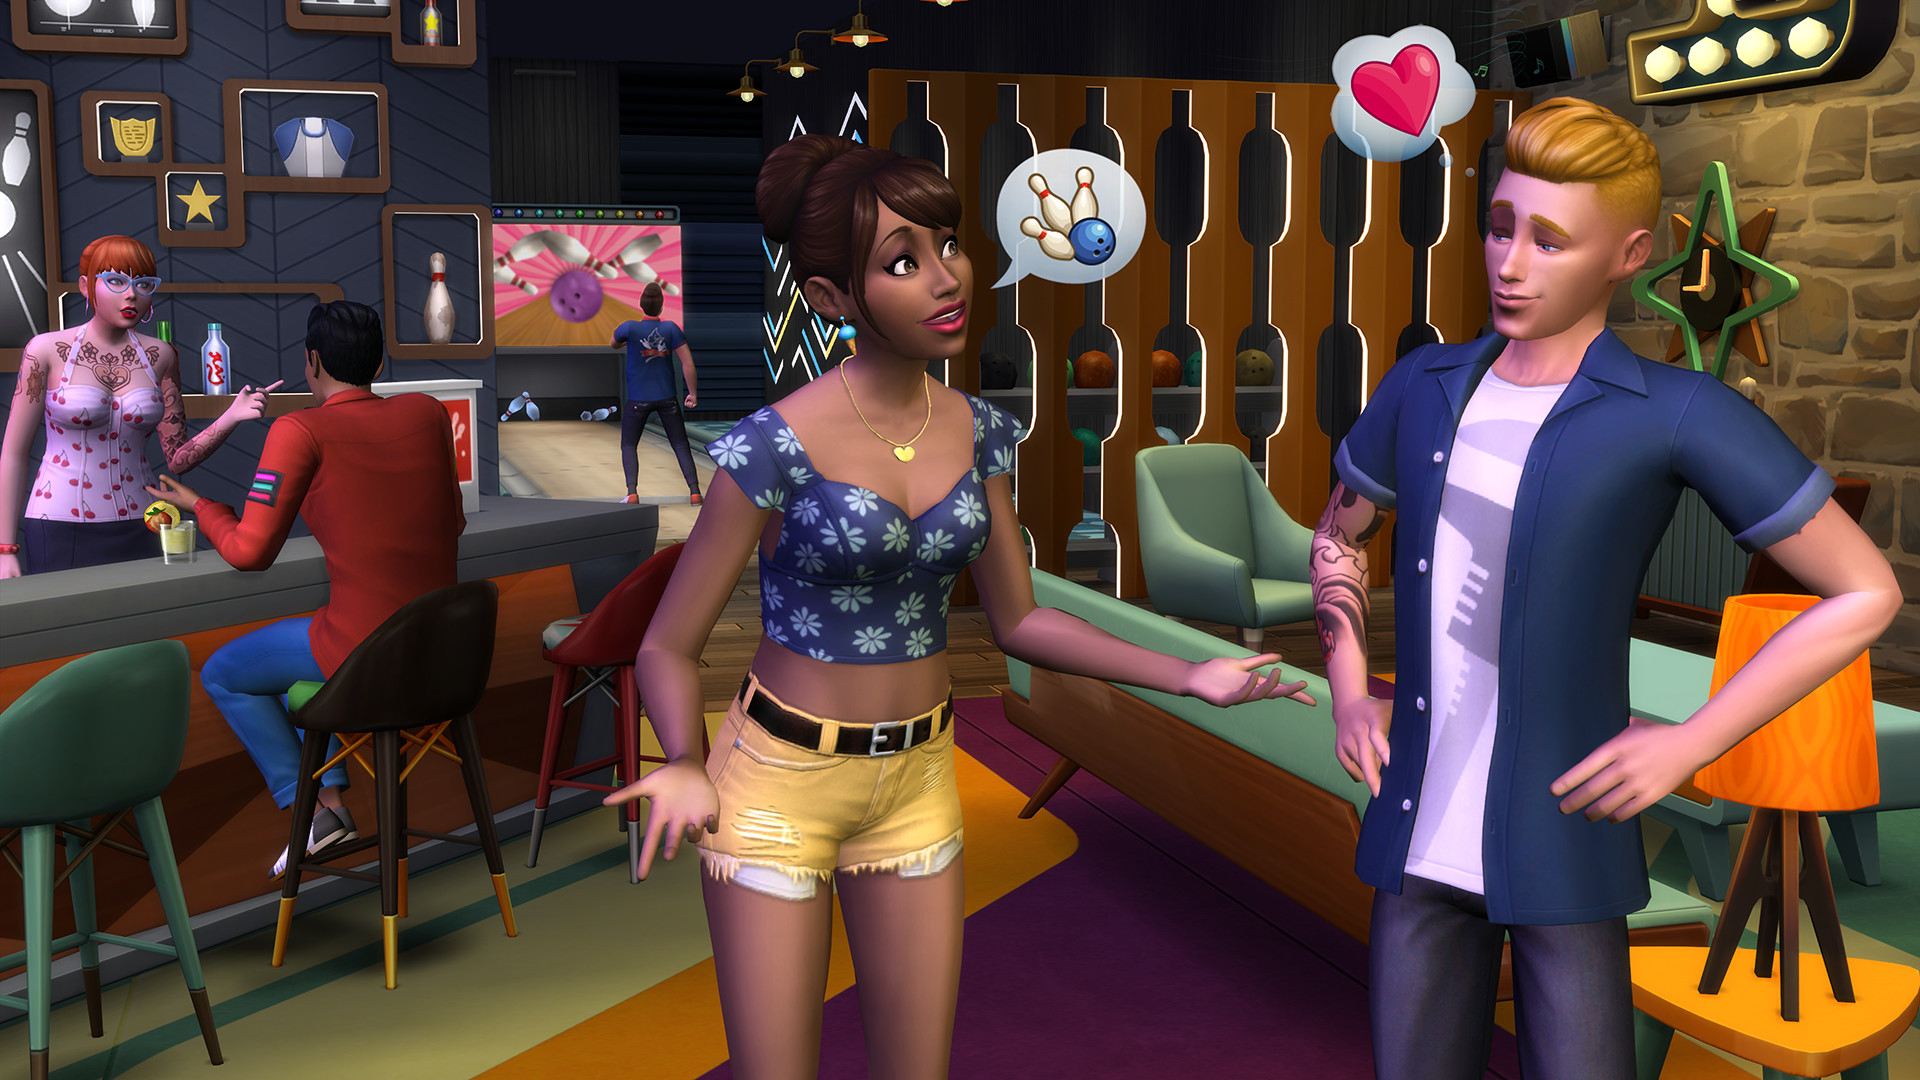 The Sims 4: Bowling Night Stuff Free Download PC Full Game